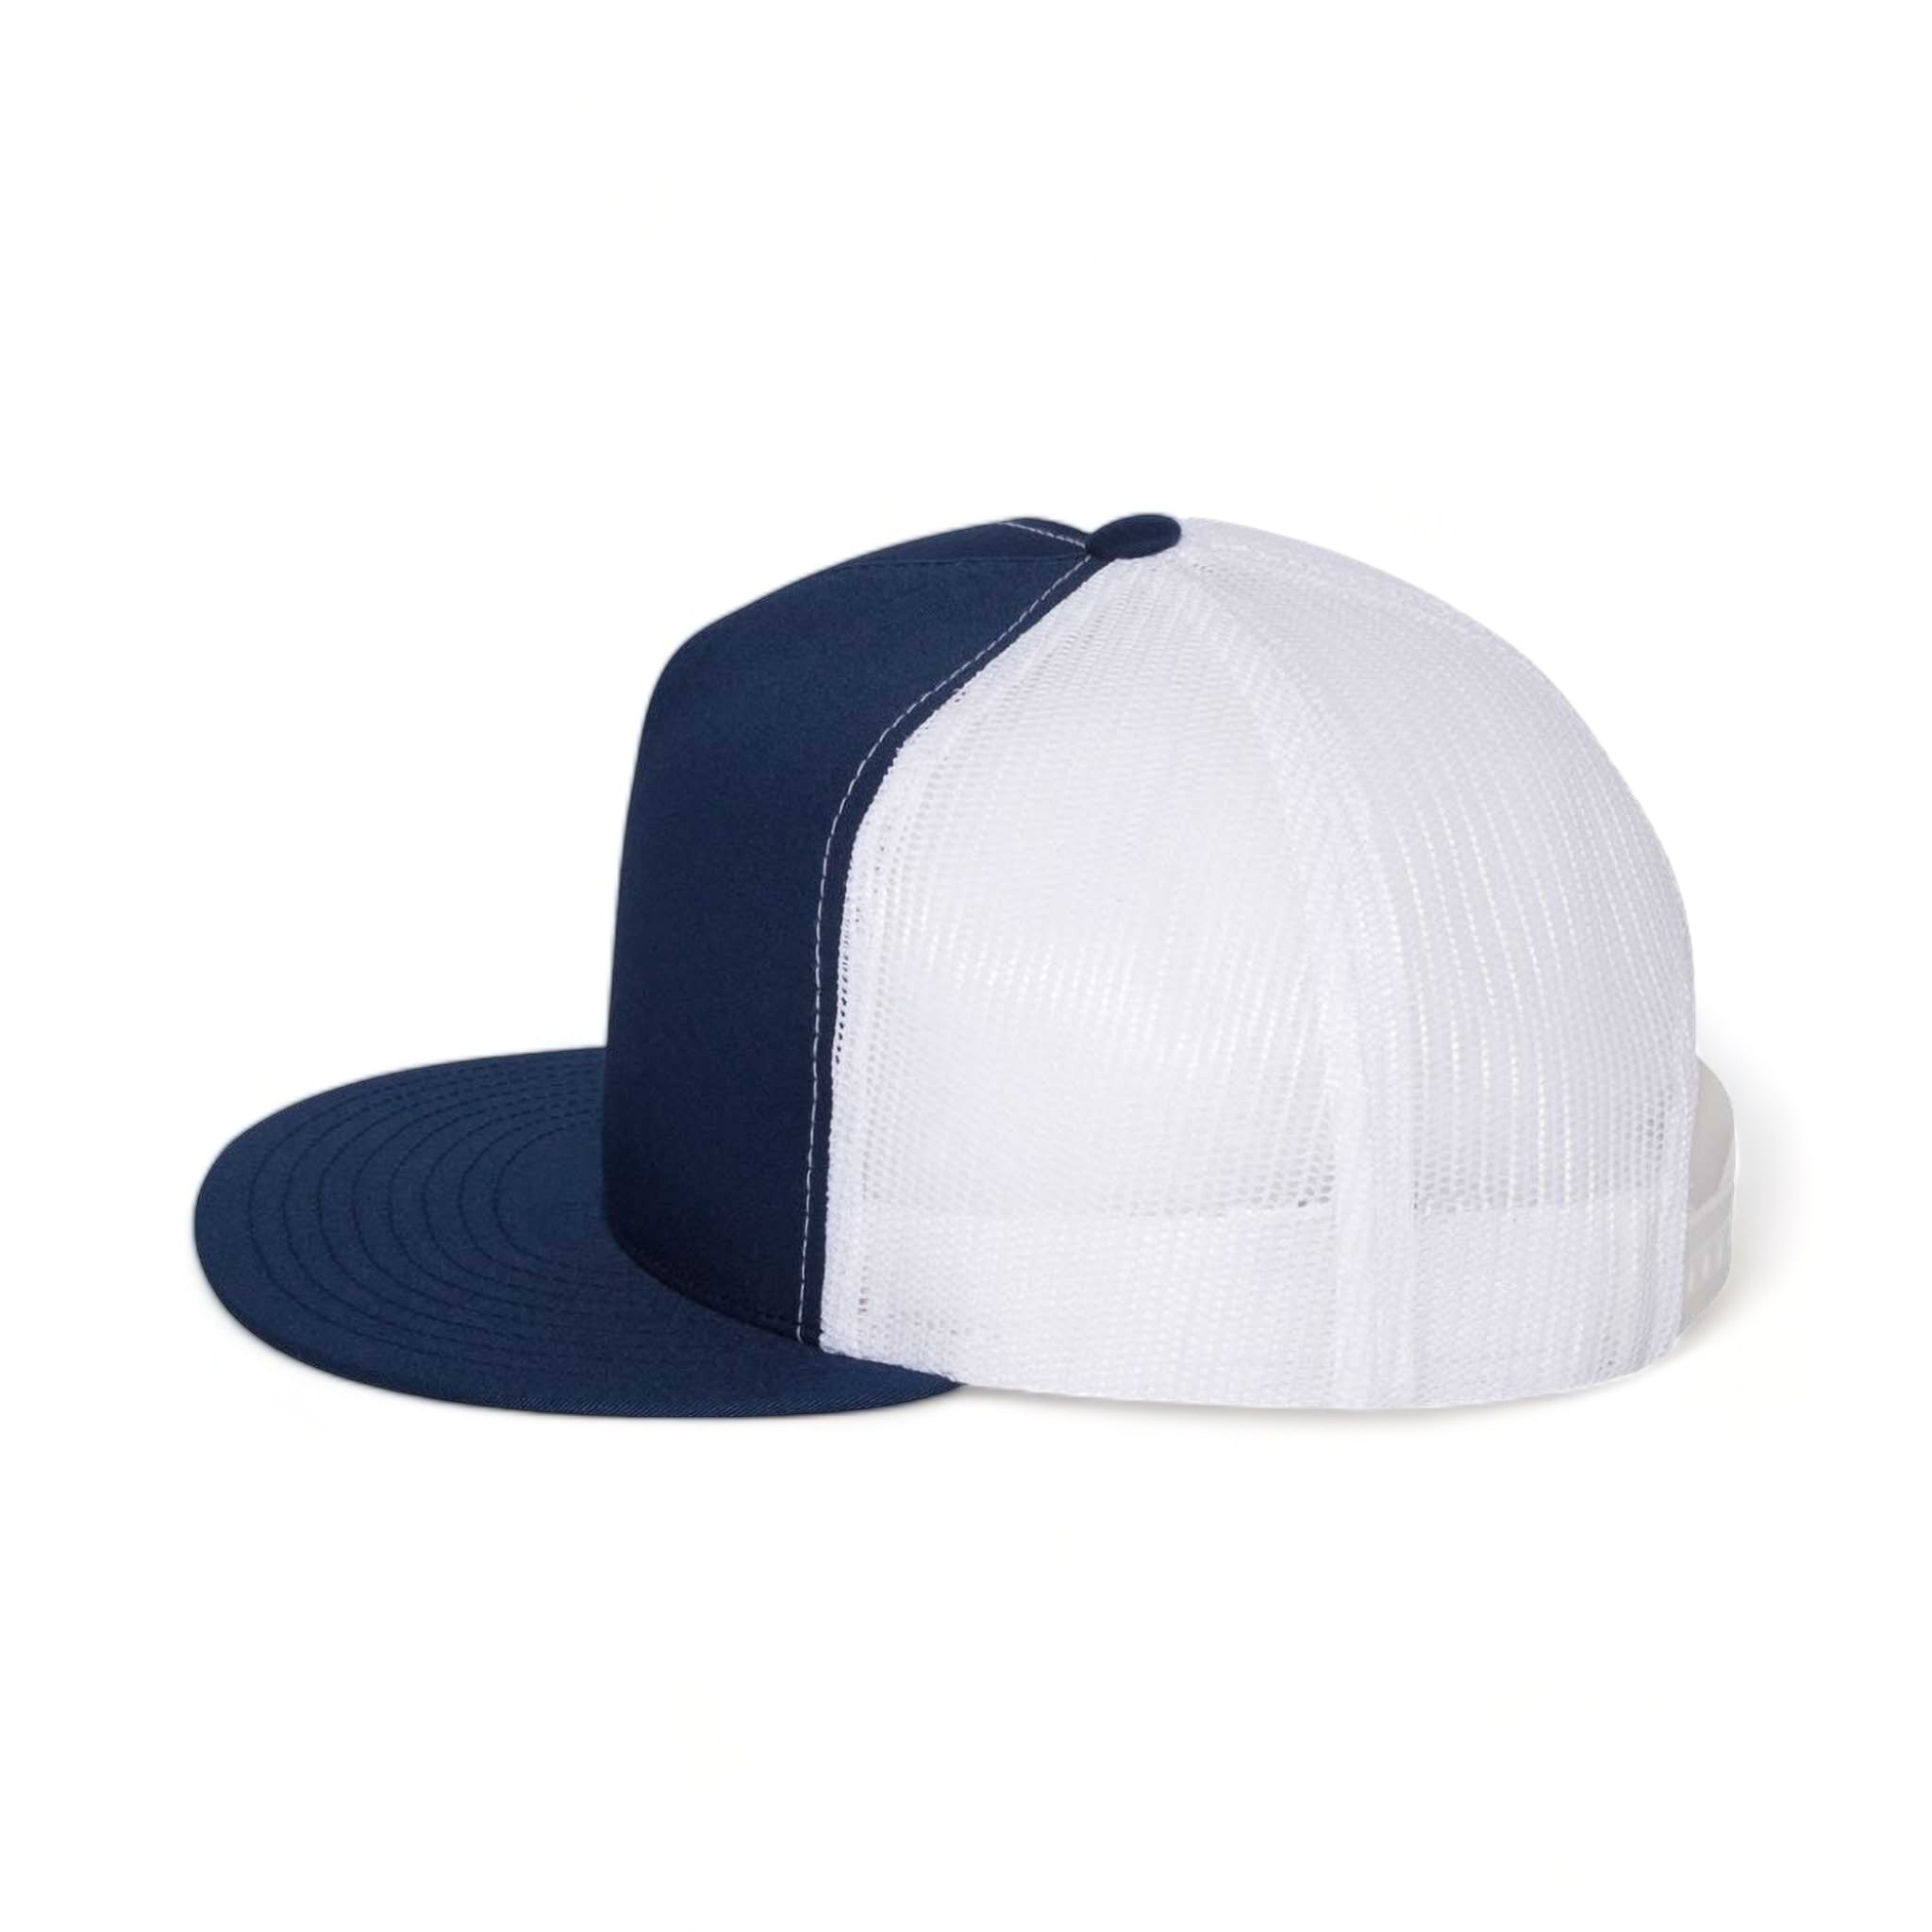 Side view of YP Classics 6006 custom hat in navy and white